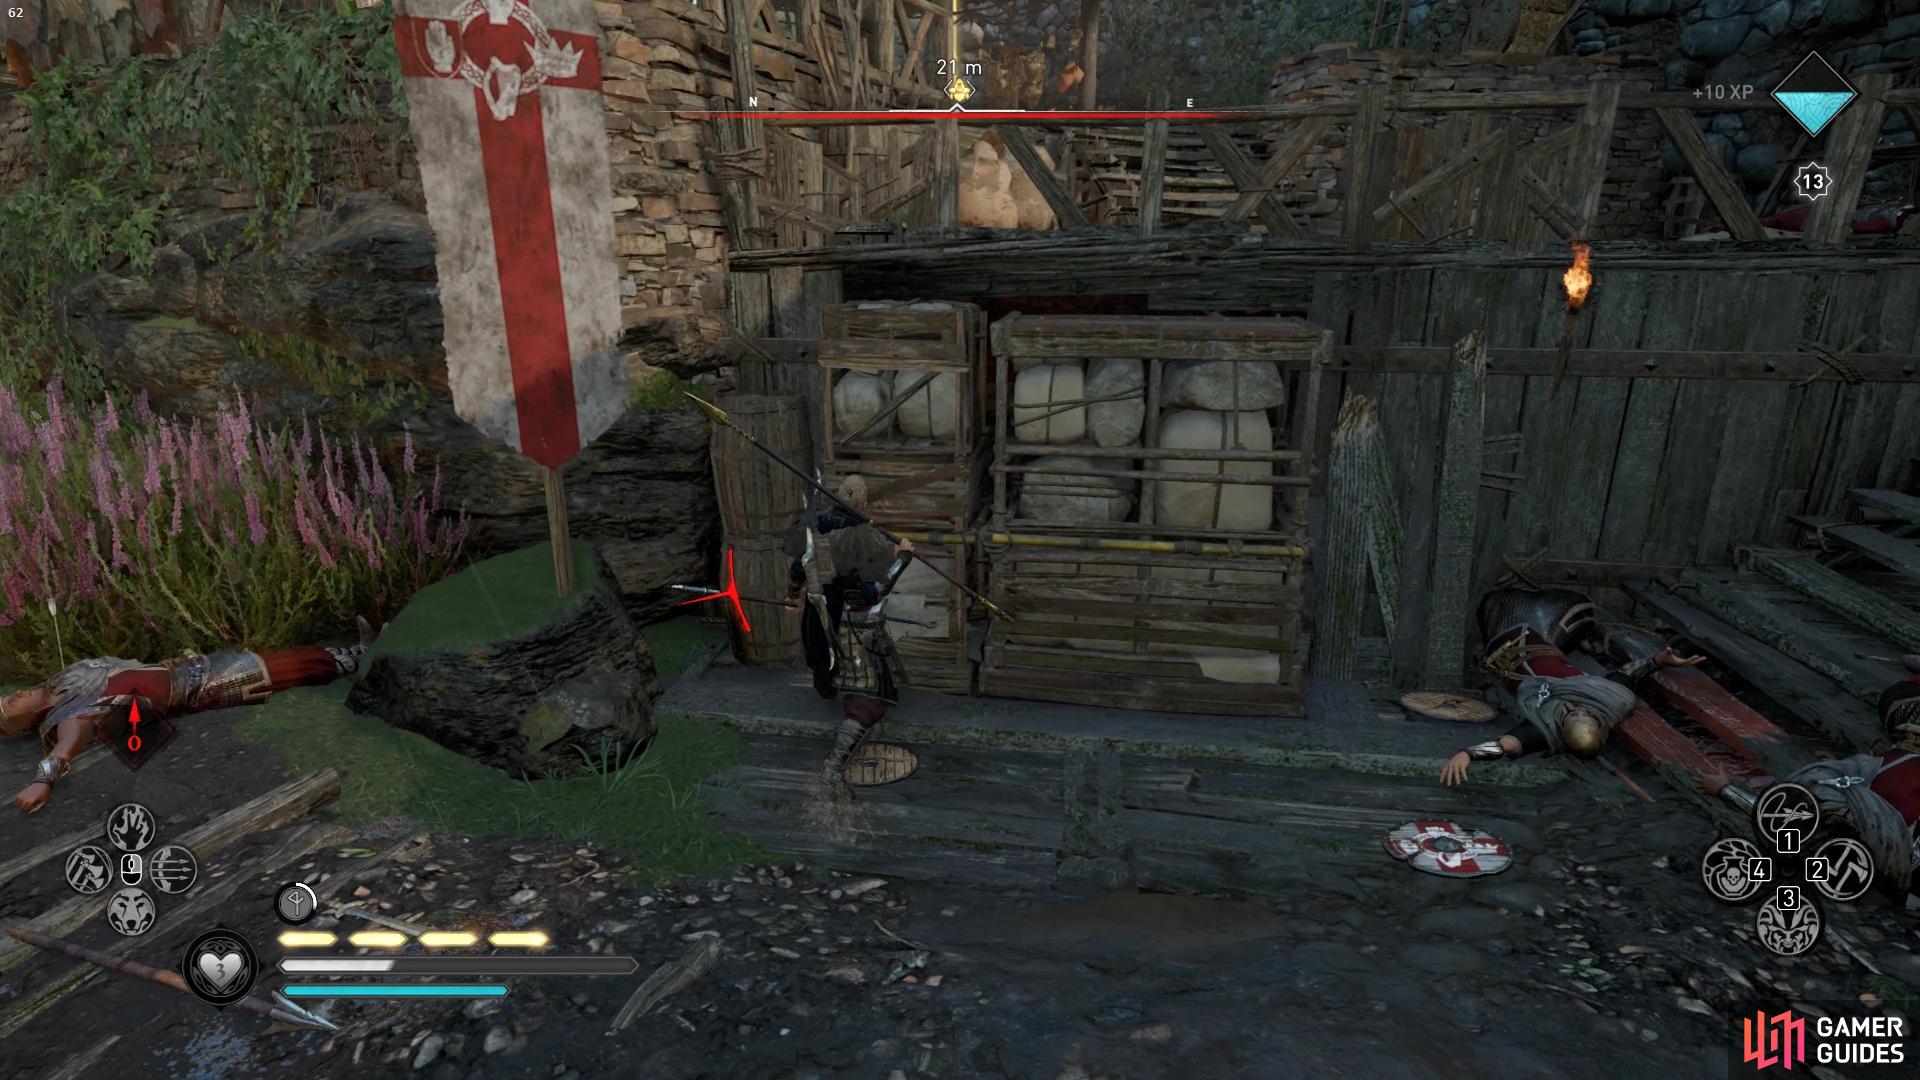 youll need to move these barricades out of your way in order to reach the chest.